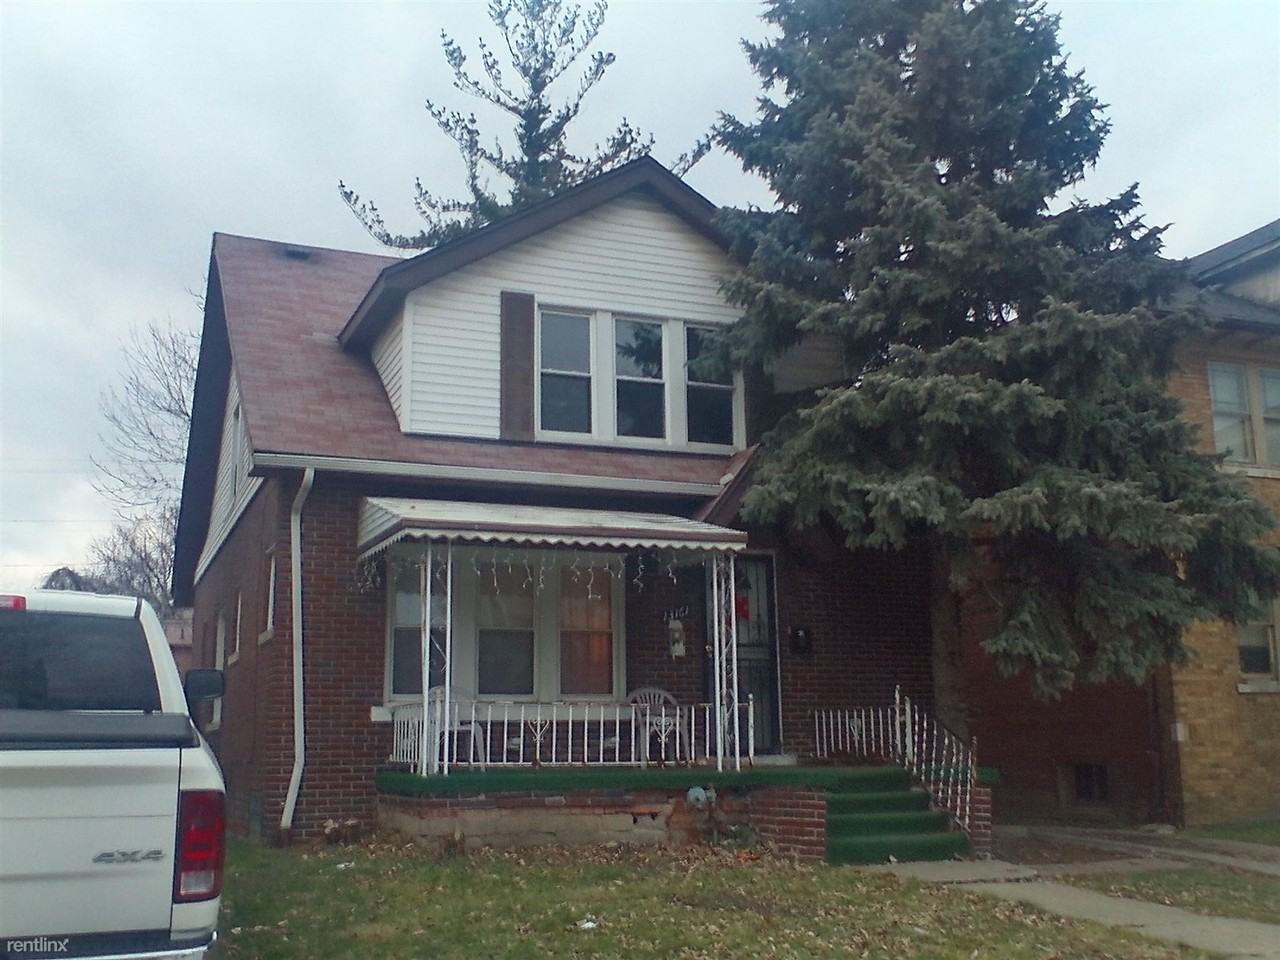 Monica Upper Flat No Application Fee No Credit Check Move In Today Detroit Mi 404 1 Bedroom House For Rent For 475 Month Zumper